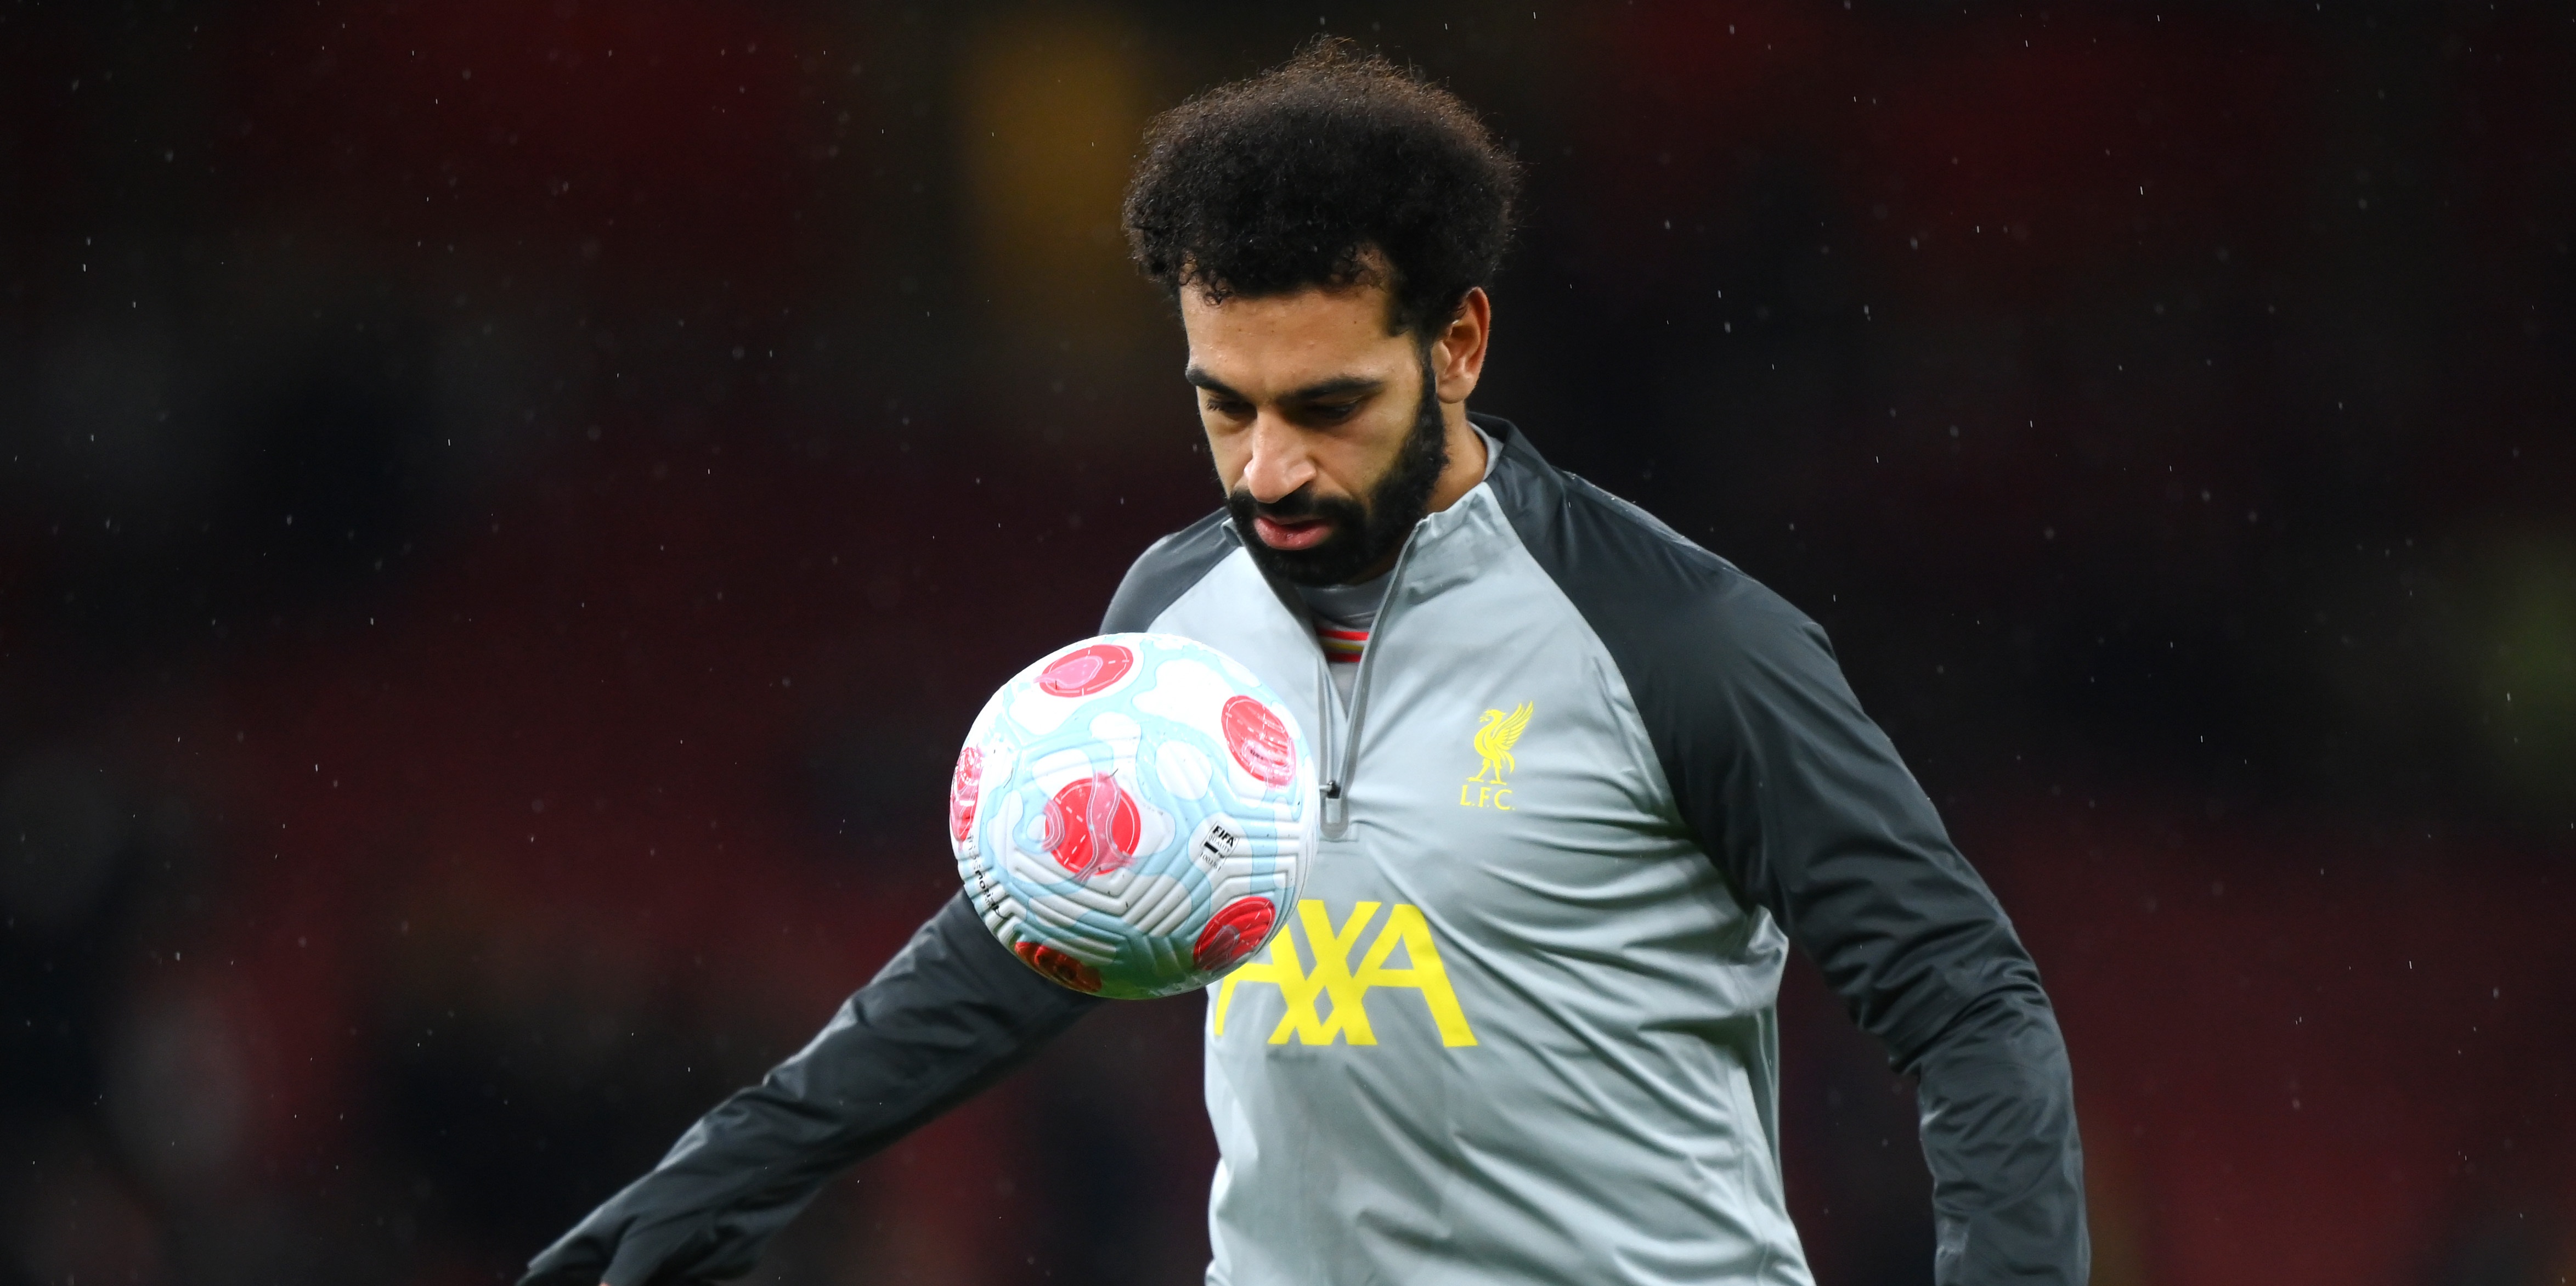 Salah tells Juventus to contact him after international break, Momblano says he was ‘honoured by the call’